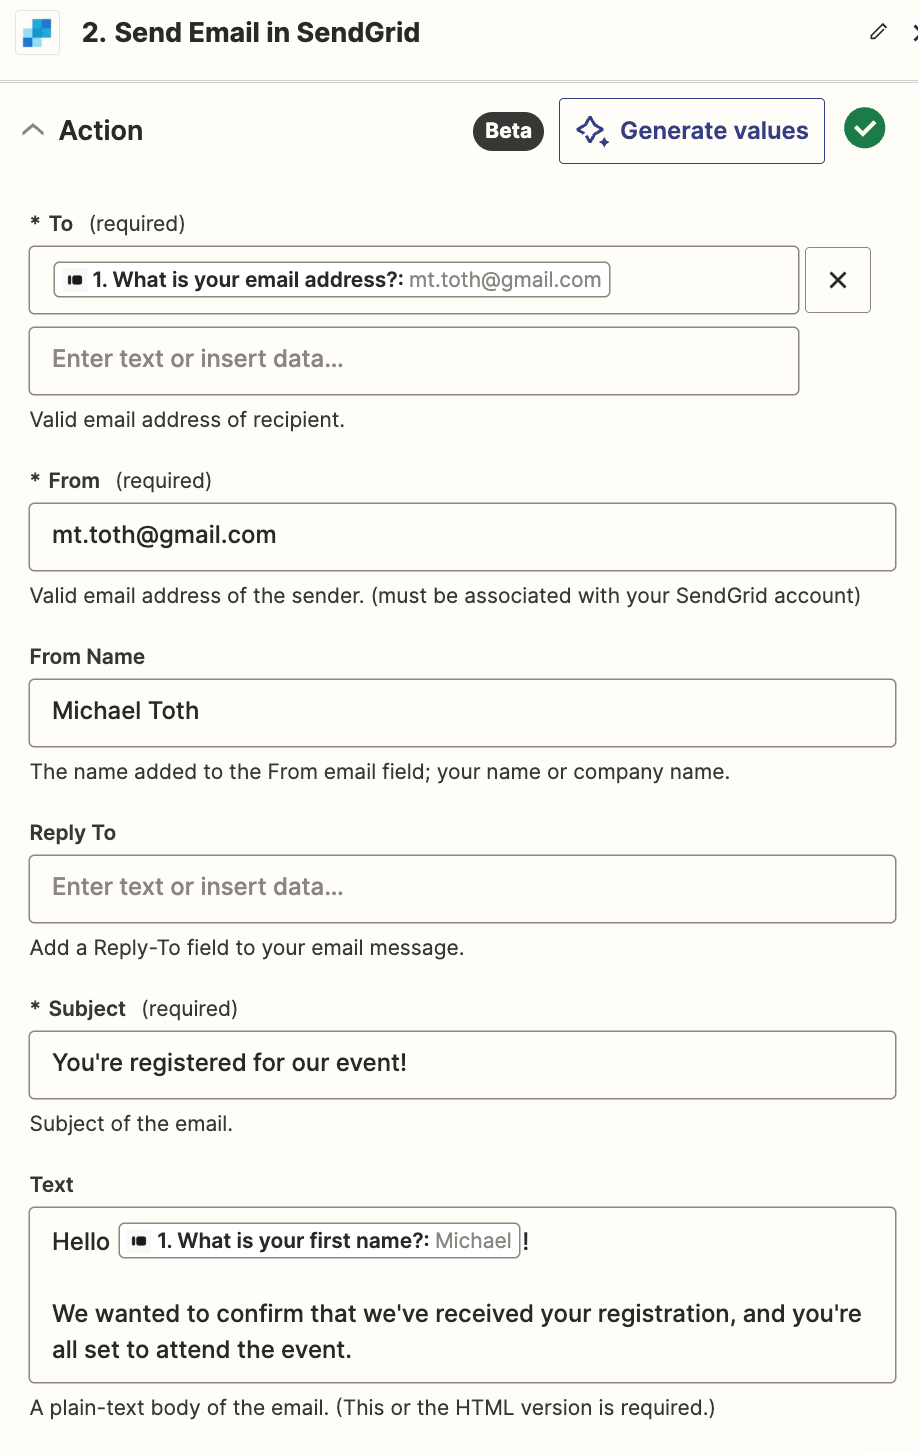 A SendGrid email action step in the Zap editor with fields customized with data from the previous Typeform step.